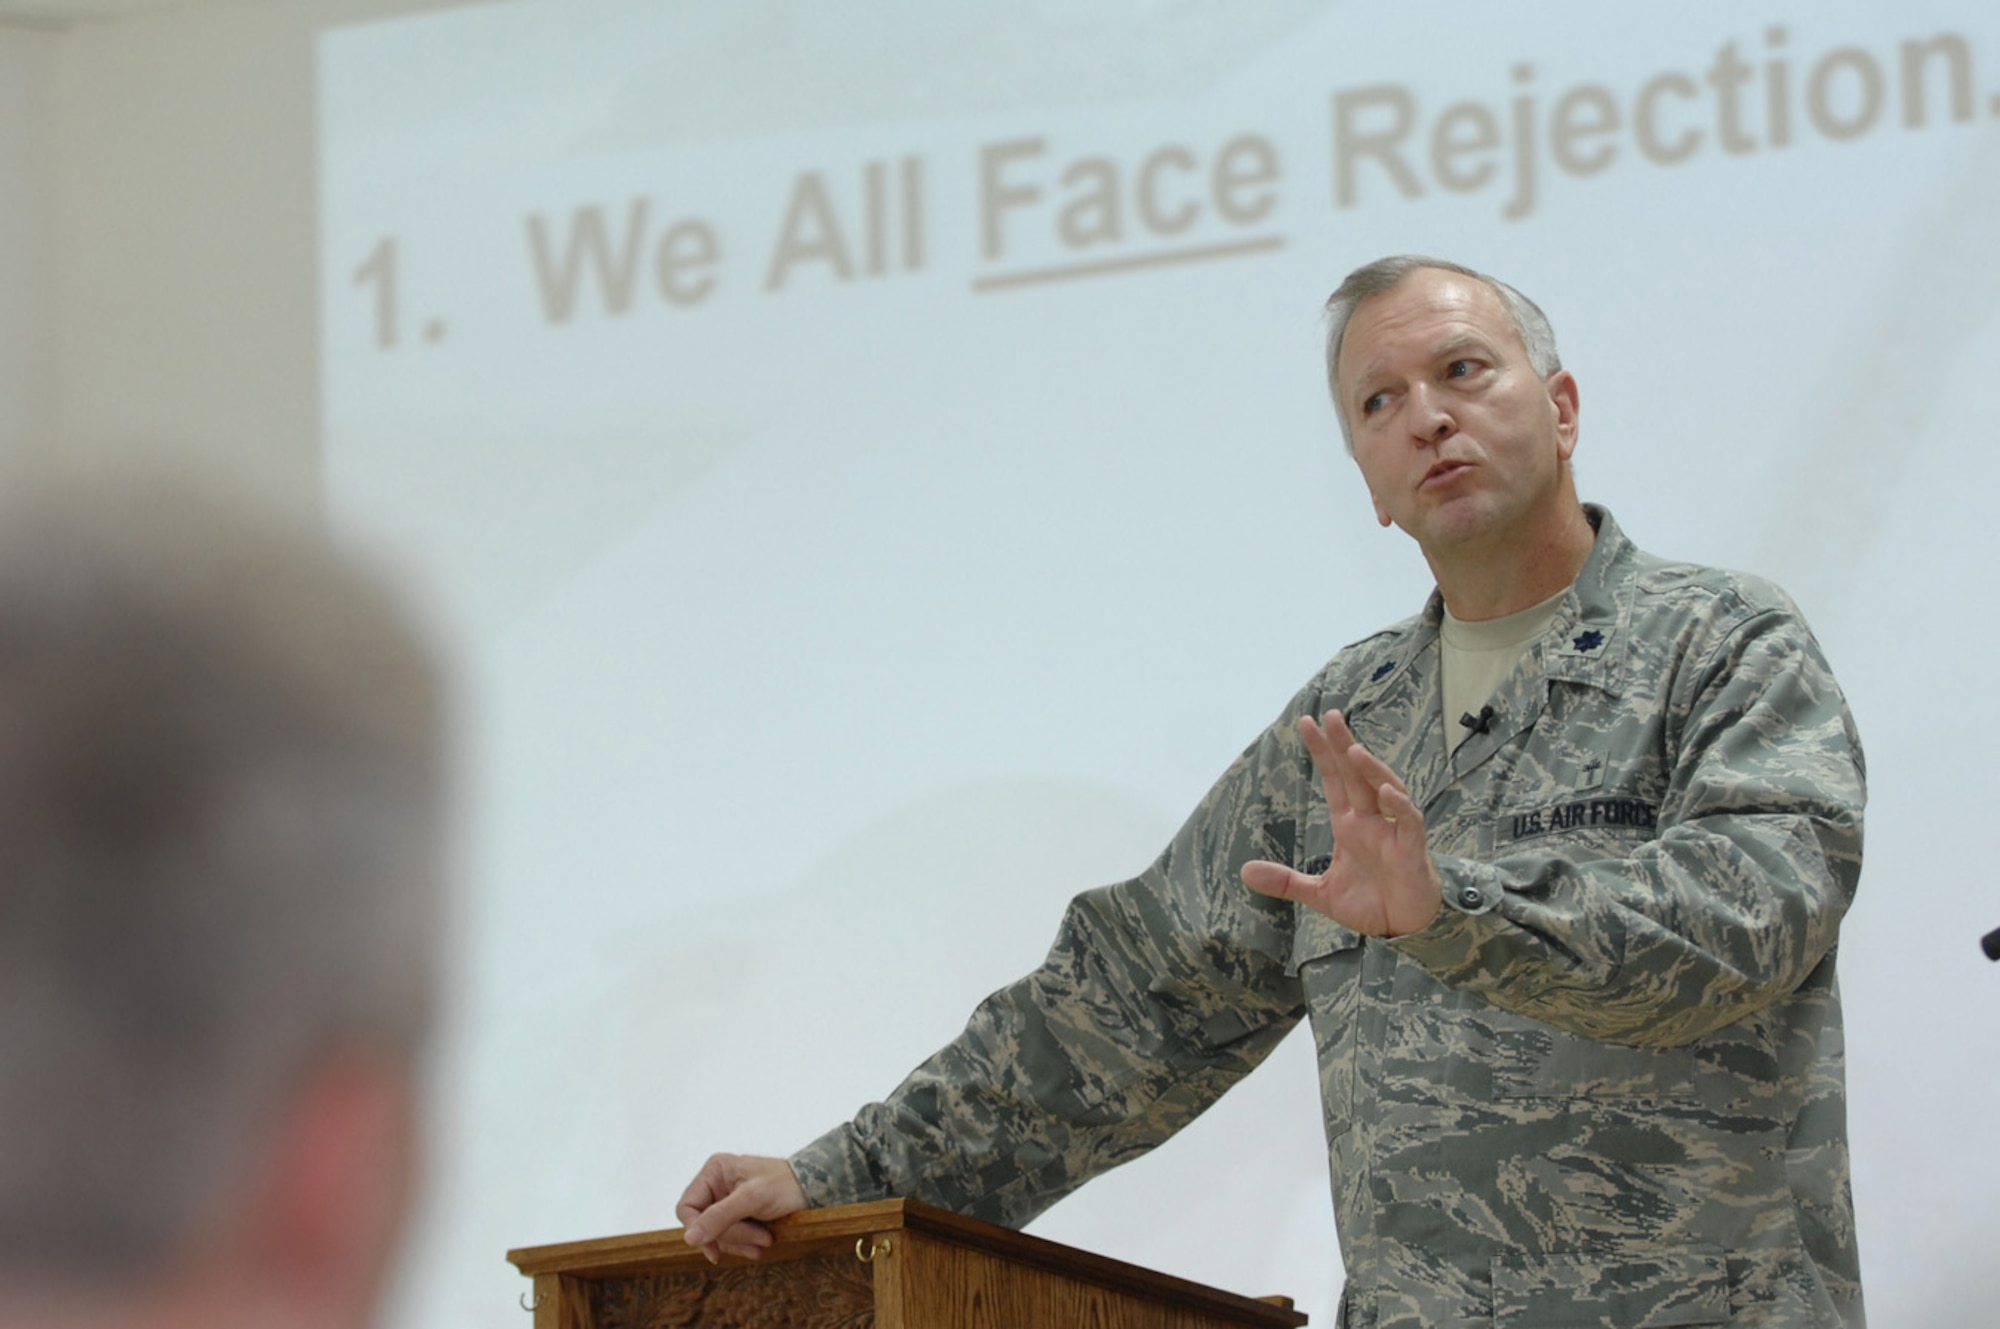 BALAD AIR BASE, Iraq -- Lt. Col. Steve West, 332nd Air Expeditionary Wing chaplain, speaks to members of his congregation about rejection and how to overcome it Jan. 20. Each week Chaplain West offers sermons touching on issues affecting deployed servicemembers. (U.S. Air Force photo by Senior Airman Julianne Showalter)